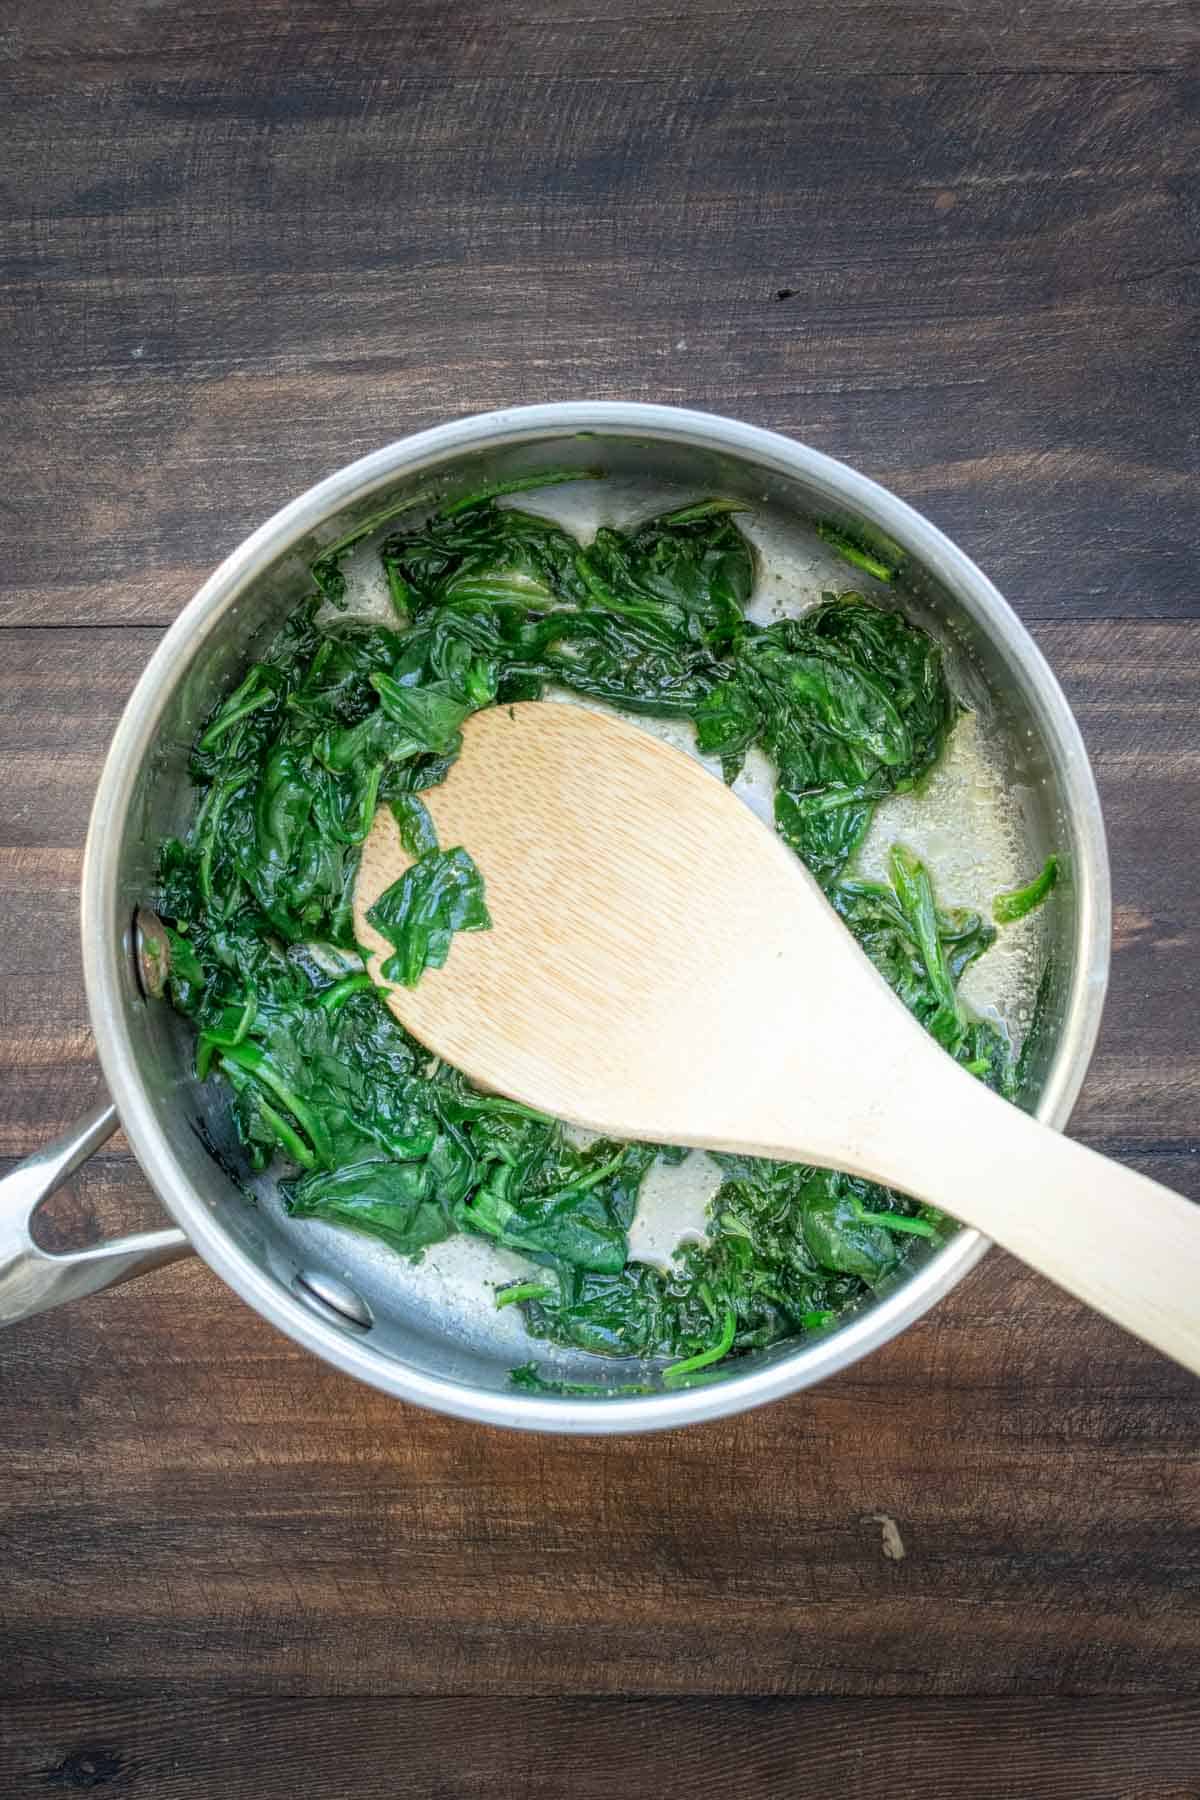 Spinach being sautéed with a wooden spoon in a metal pot.